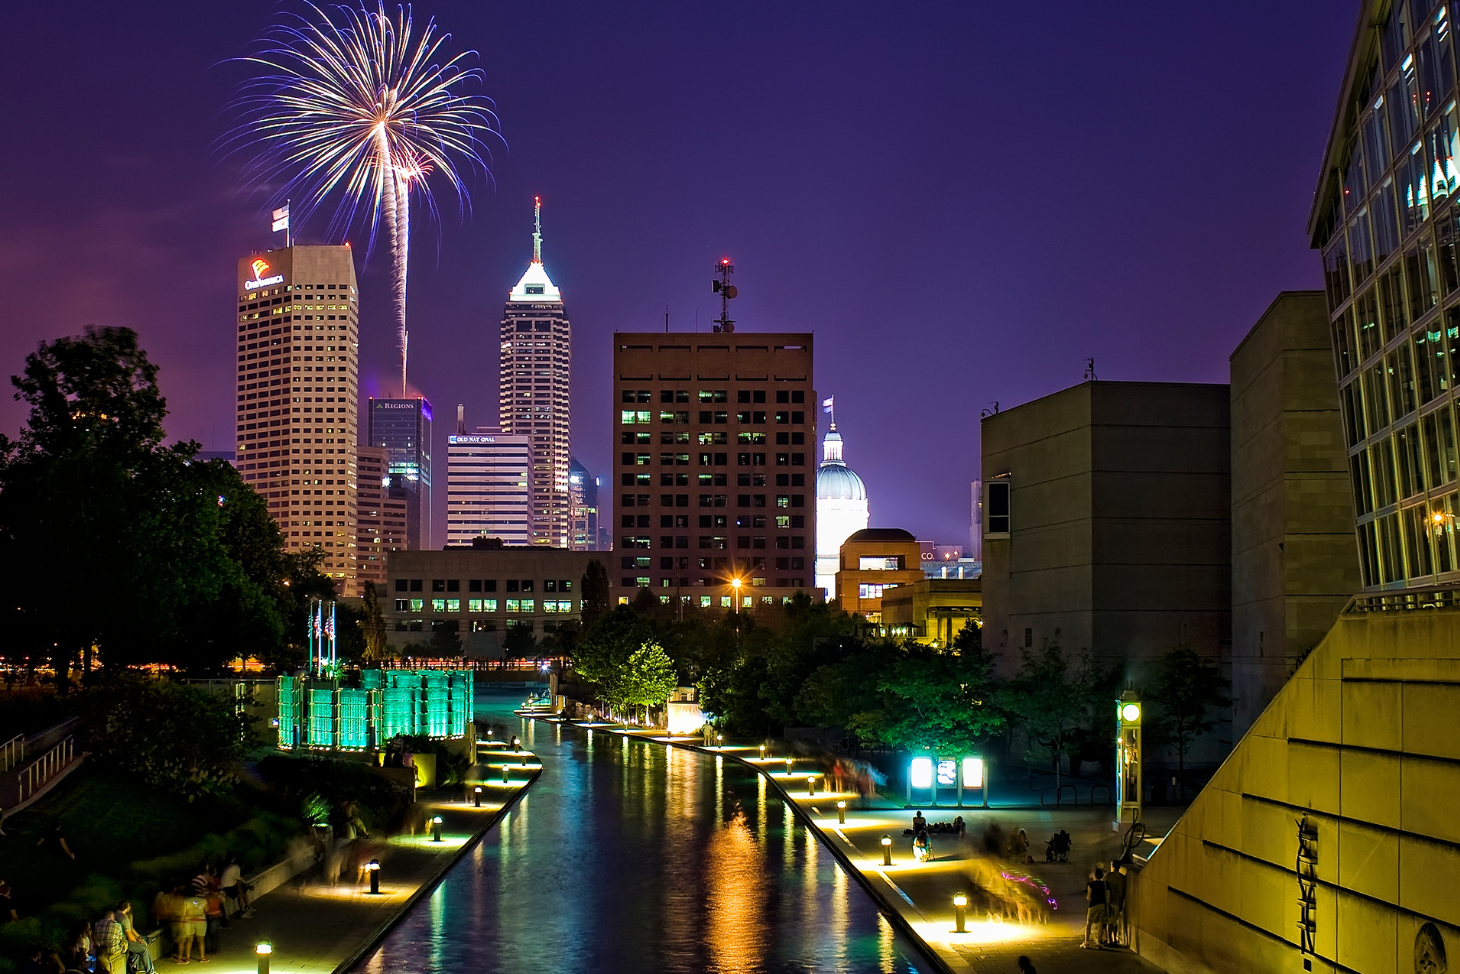 View of the Indianapolis skyline at night with fireworks